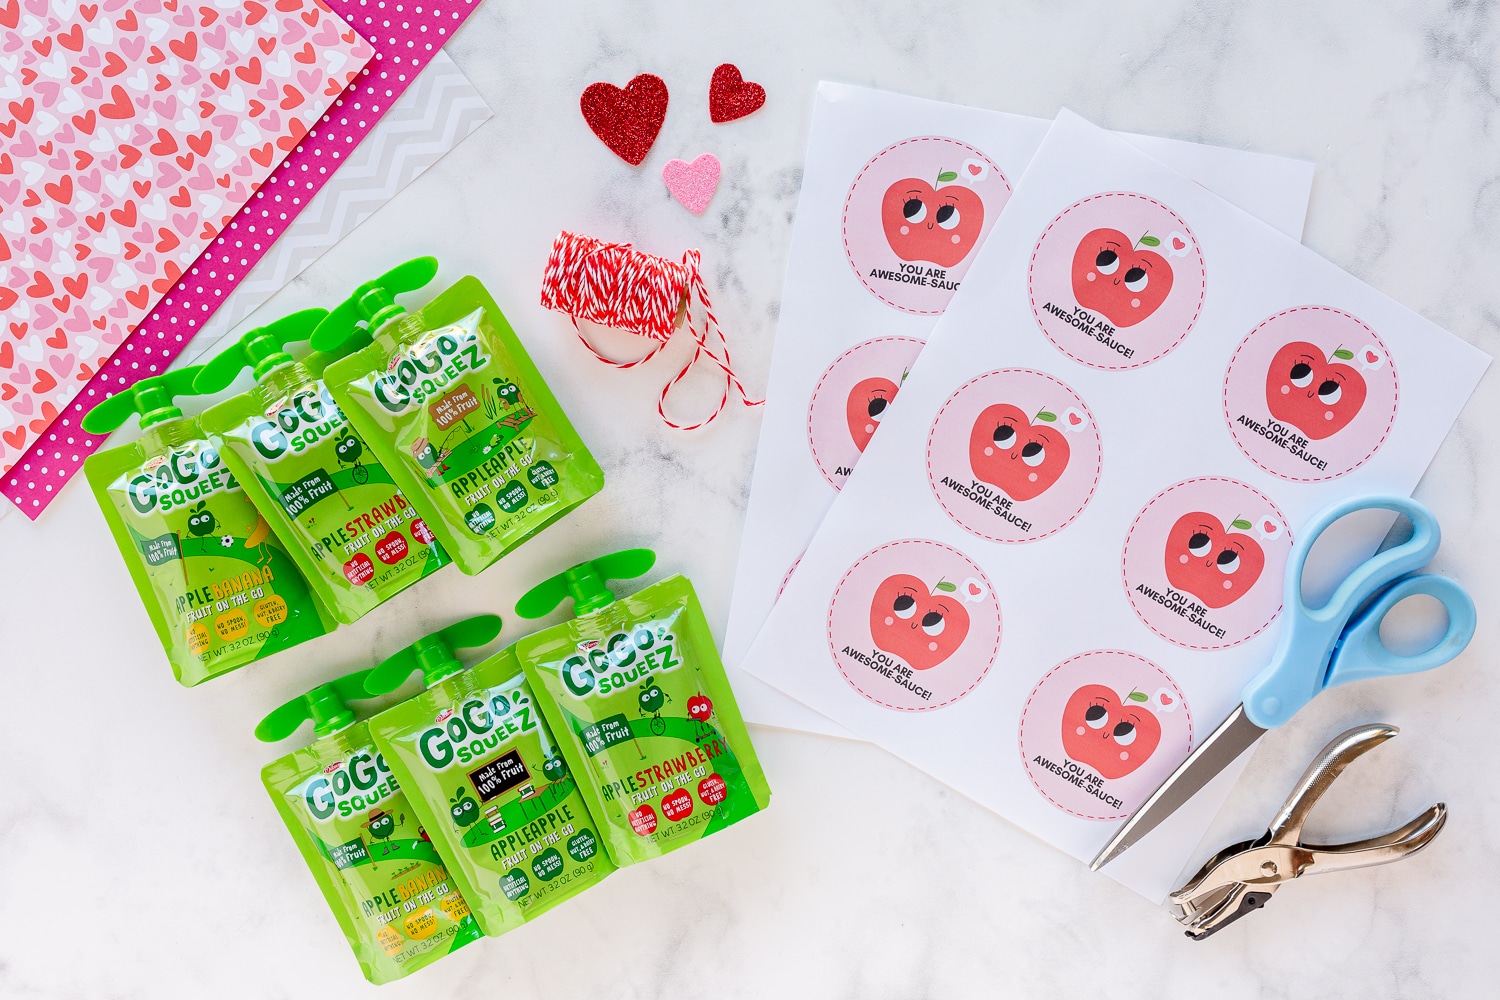 supplies needed: printable gift tag, applesauce pouch